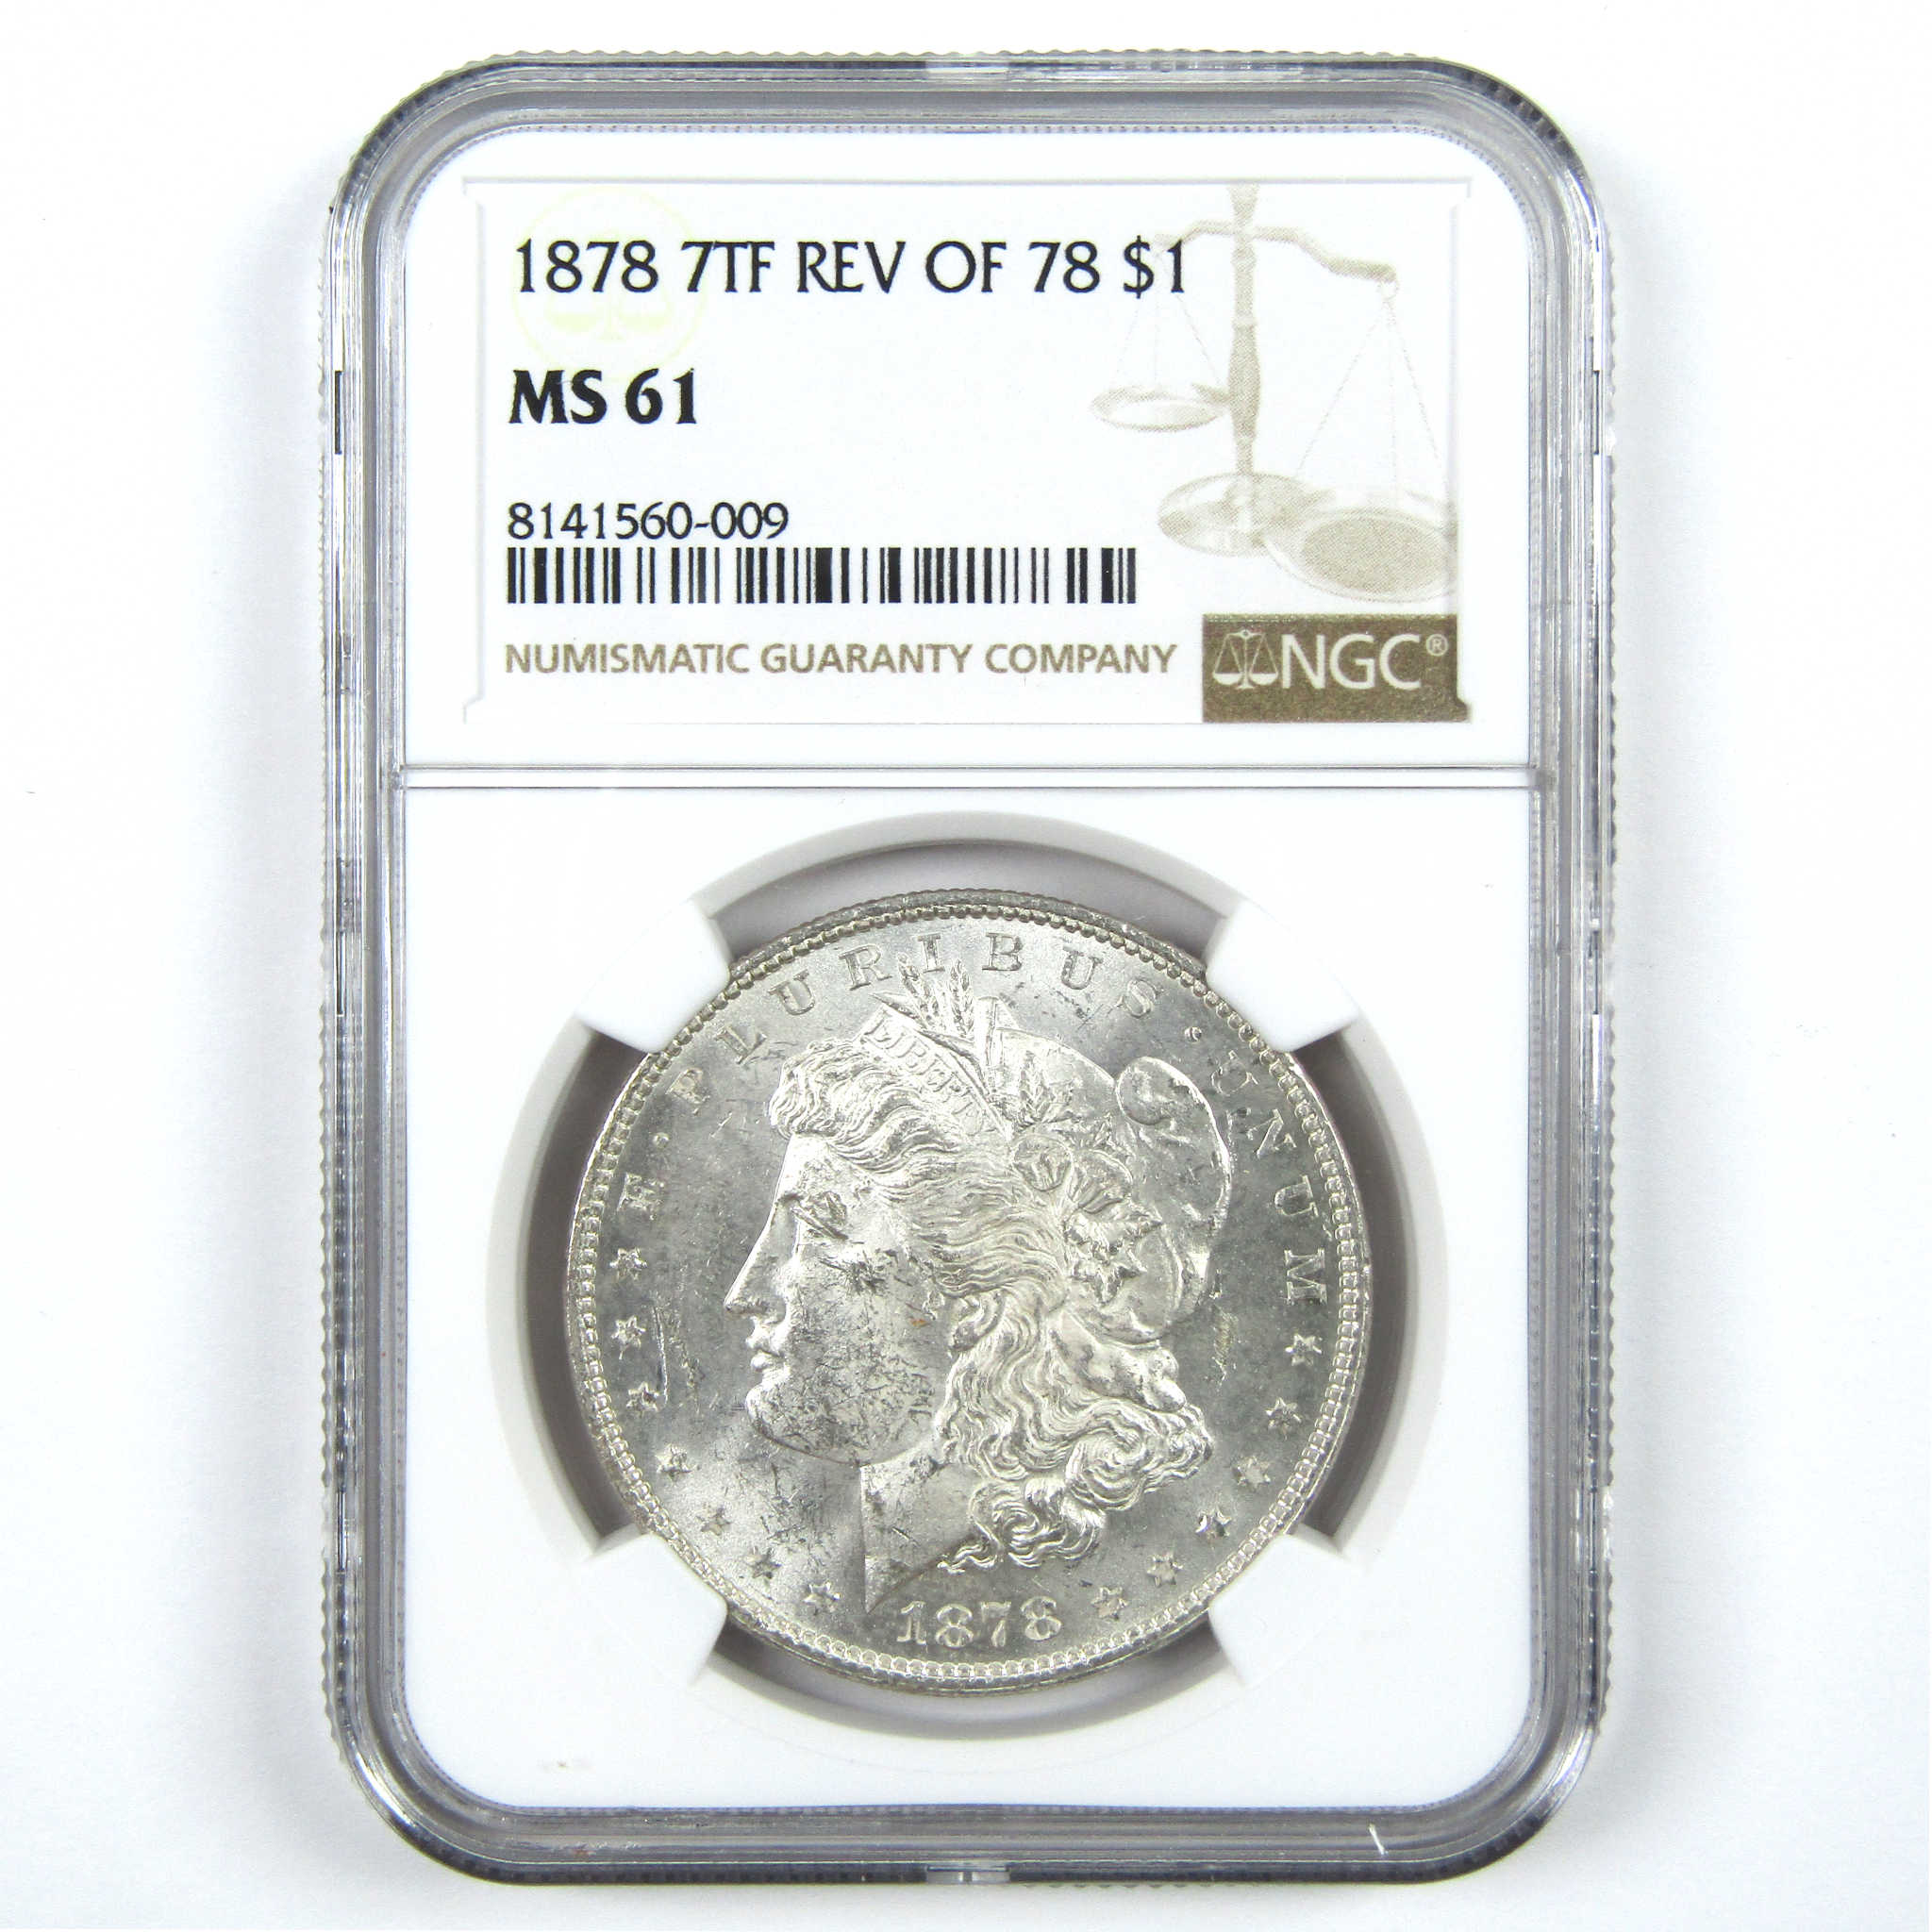 1878 7TF Rev 78 Morgan Dollar MS 61 NGC Uncirculated SKU:I14031 - Morgan coin - Morgan silver dollar - Morgan silver dollar for sale - Profile Coins &amp; Collectibles